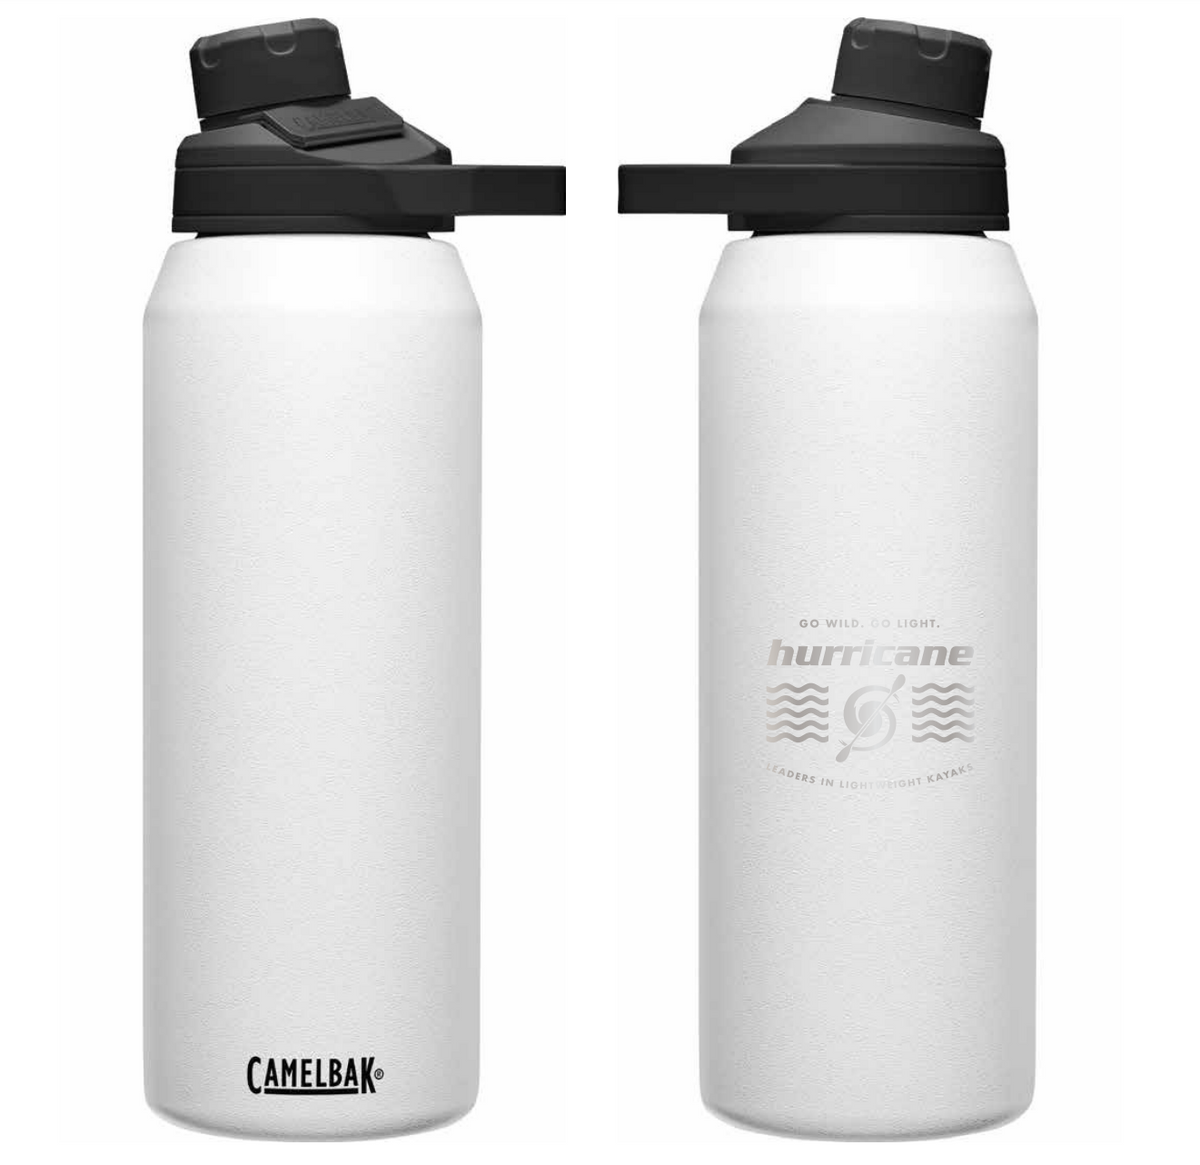 CamelBak Chute Mag Water Bottle, Insulated Stainless Steel, 40 oz